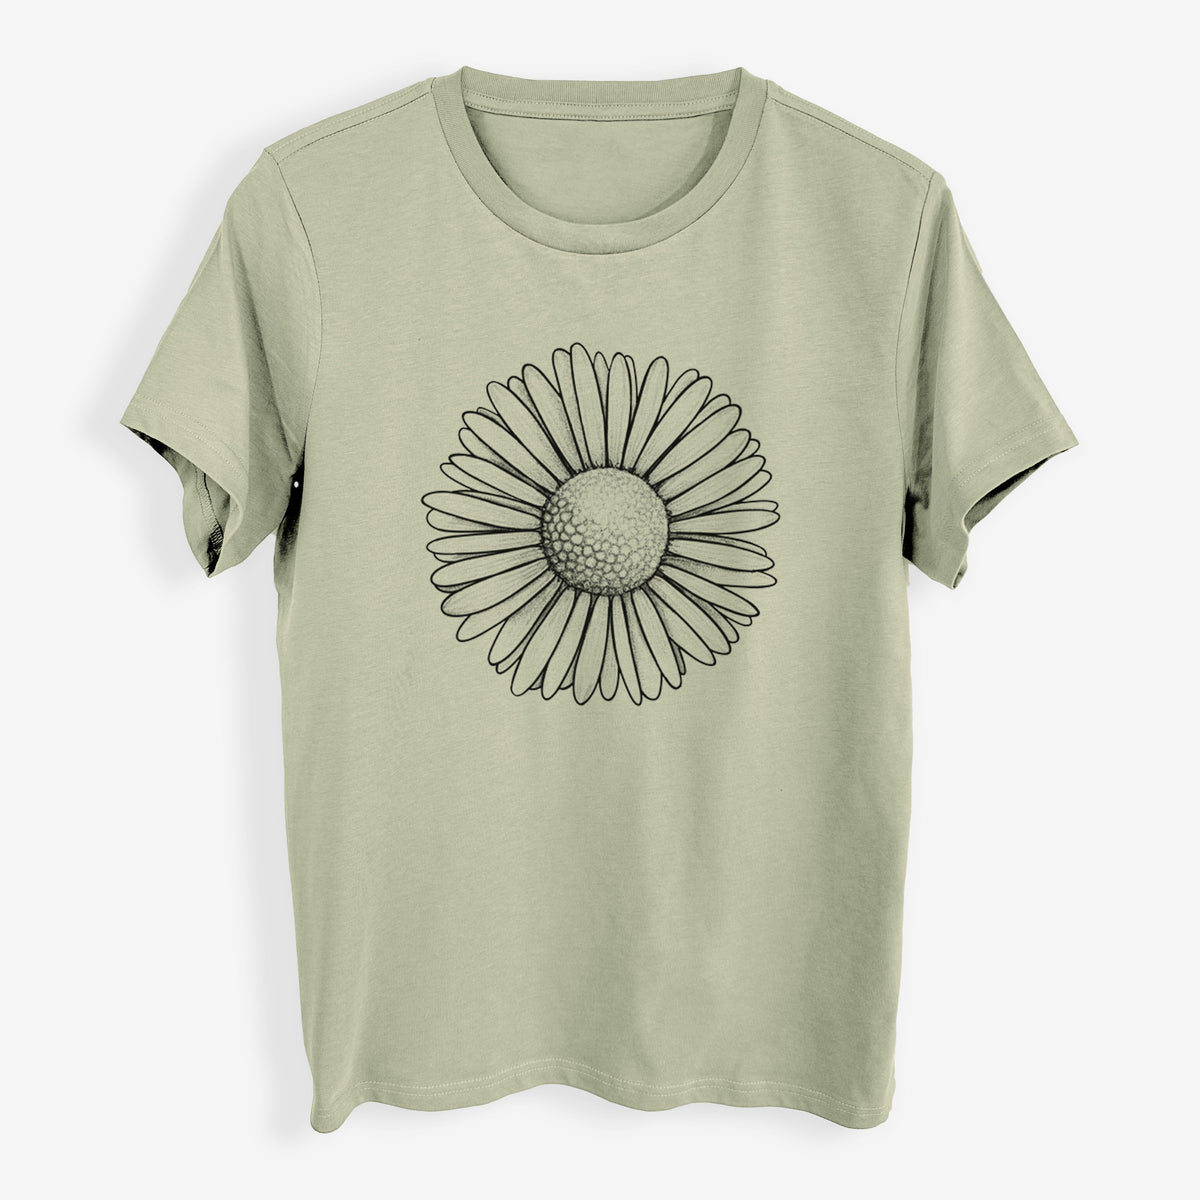 Bellis perennis - The Common Daisy - Womens Everyday Maple Tee